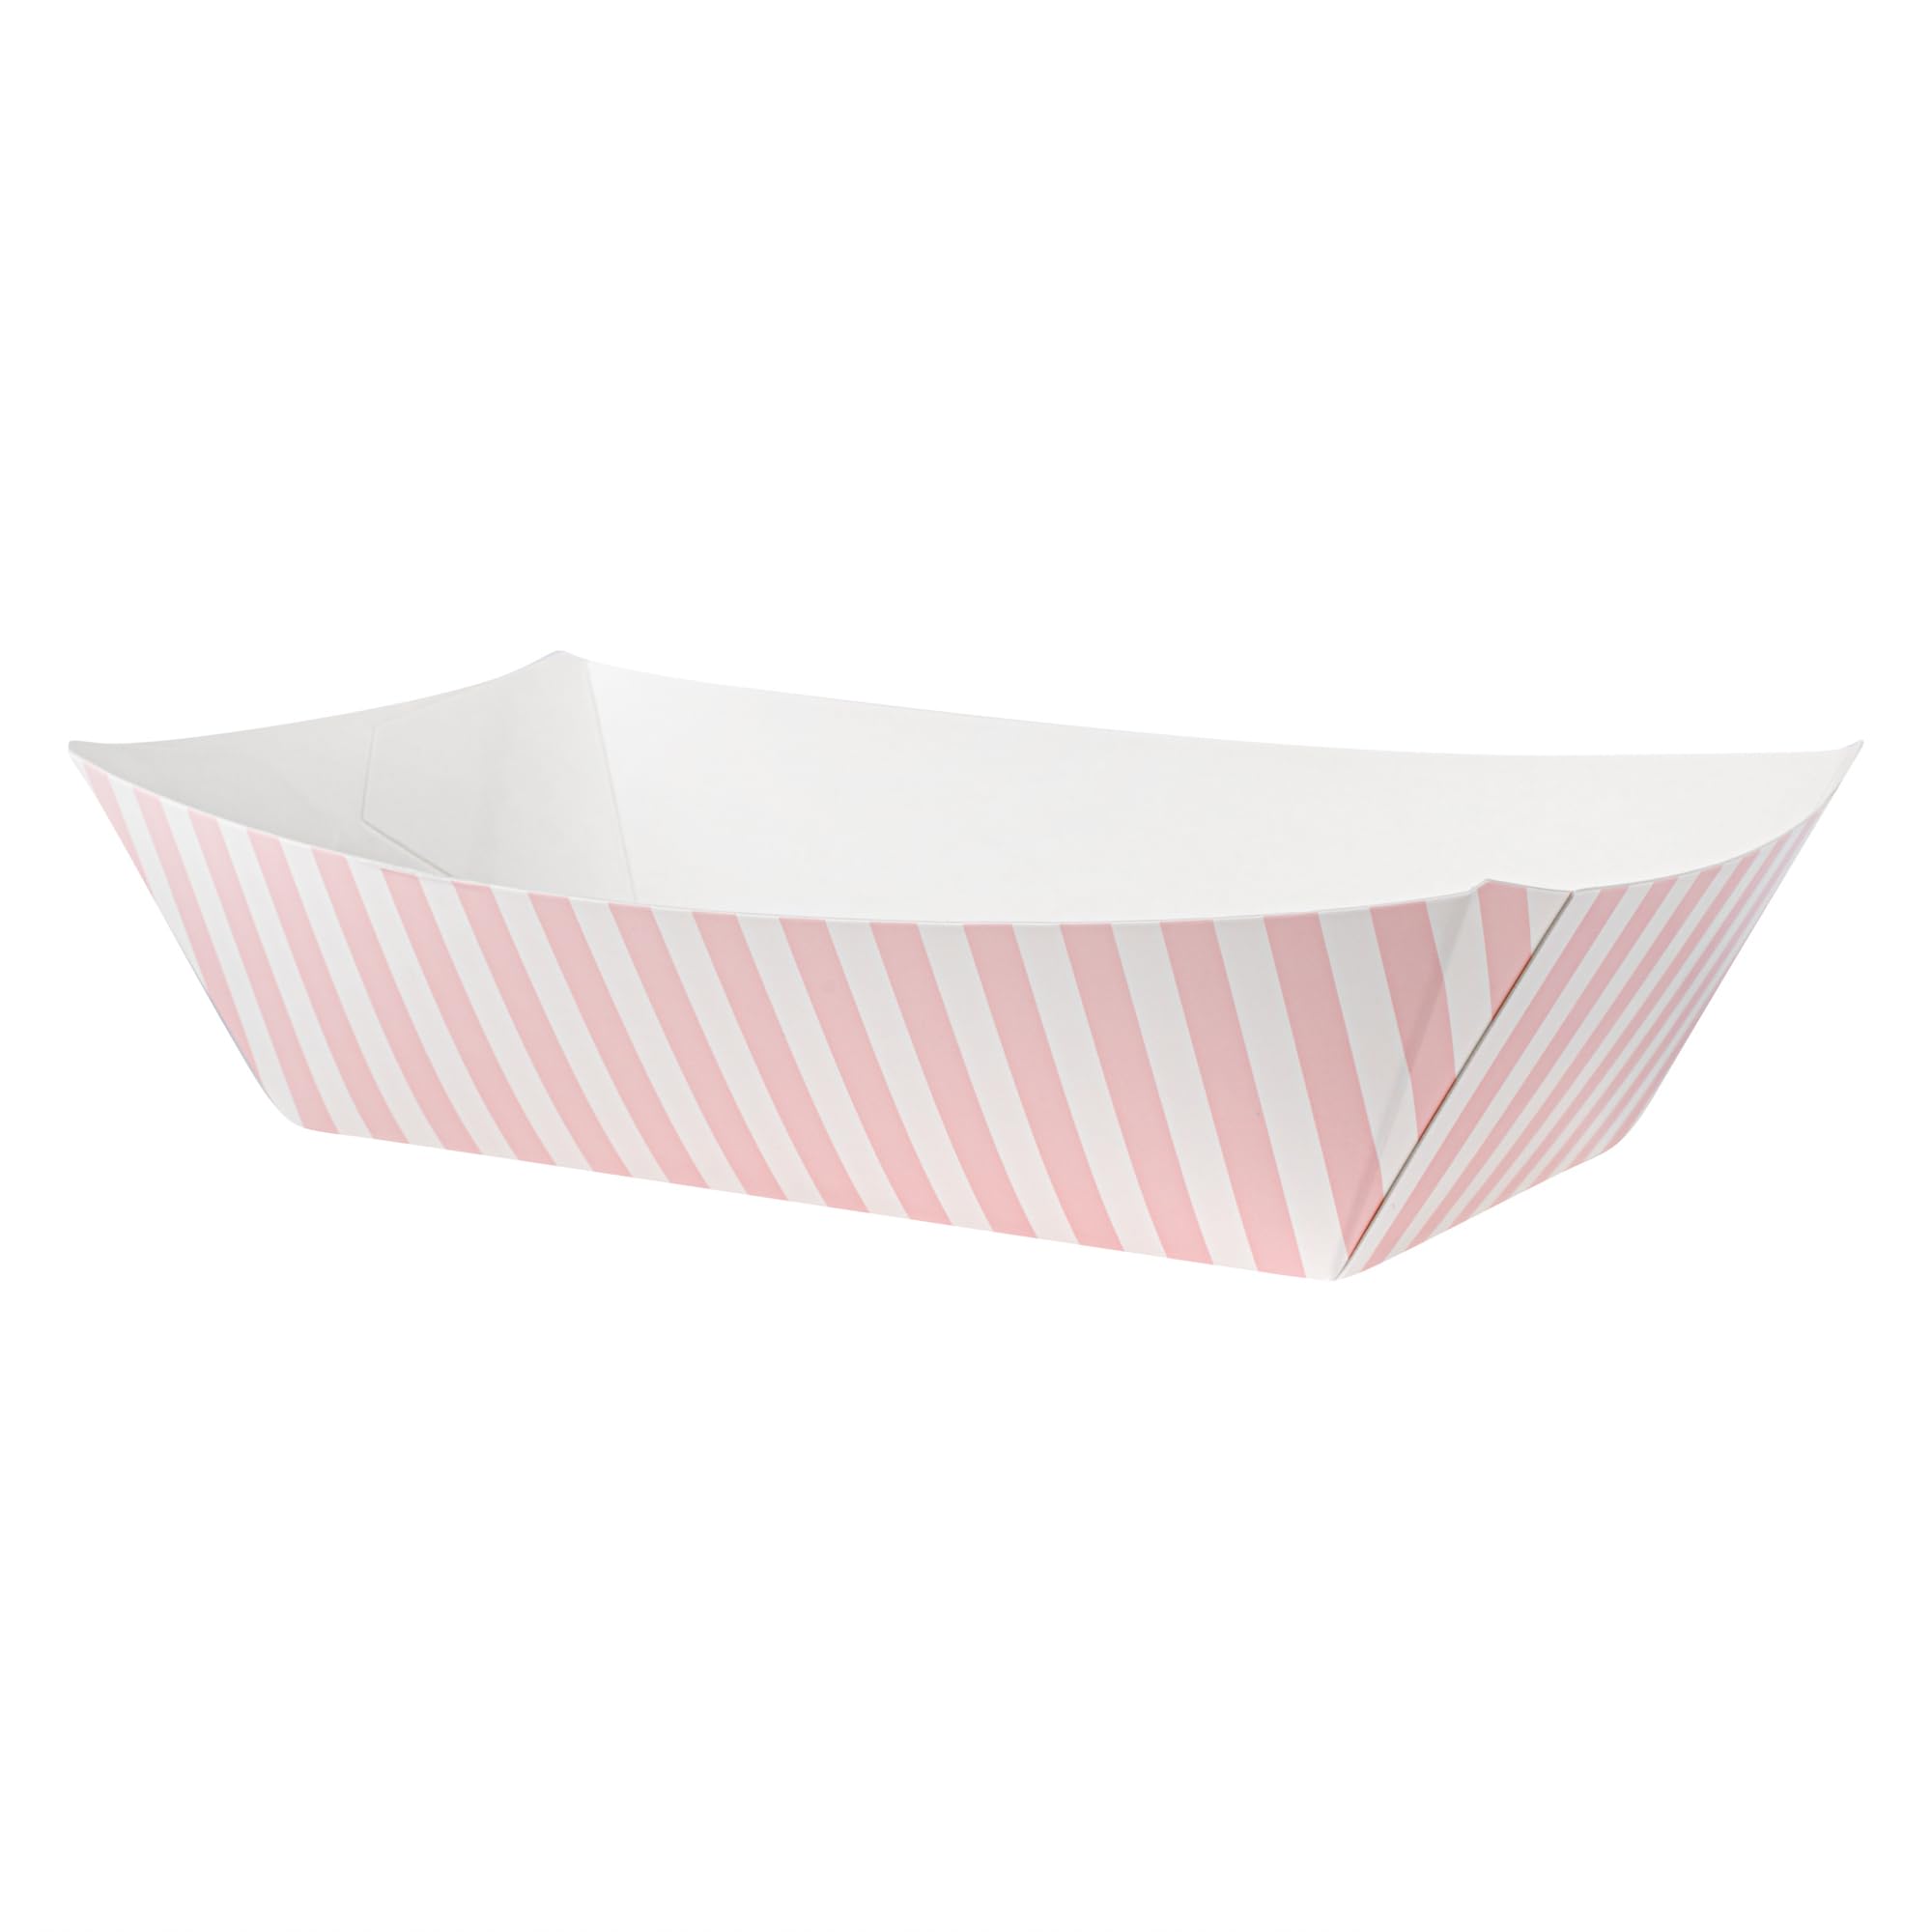 Bio Tek 2 Pound Food Boats, 200 Disposable Paper Food Trays - Heavy-Duty, Greaseproof, Pink And White Paper Boats, For Snacks, Appetizers, Or Treats, Use At Parties Or Carnivals - Restaurantware